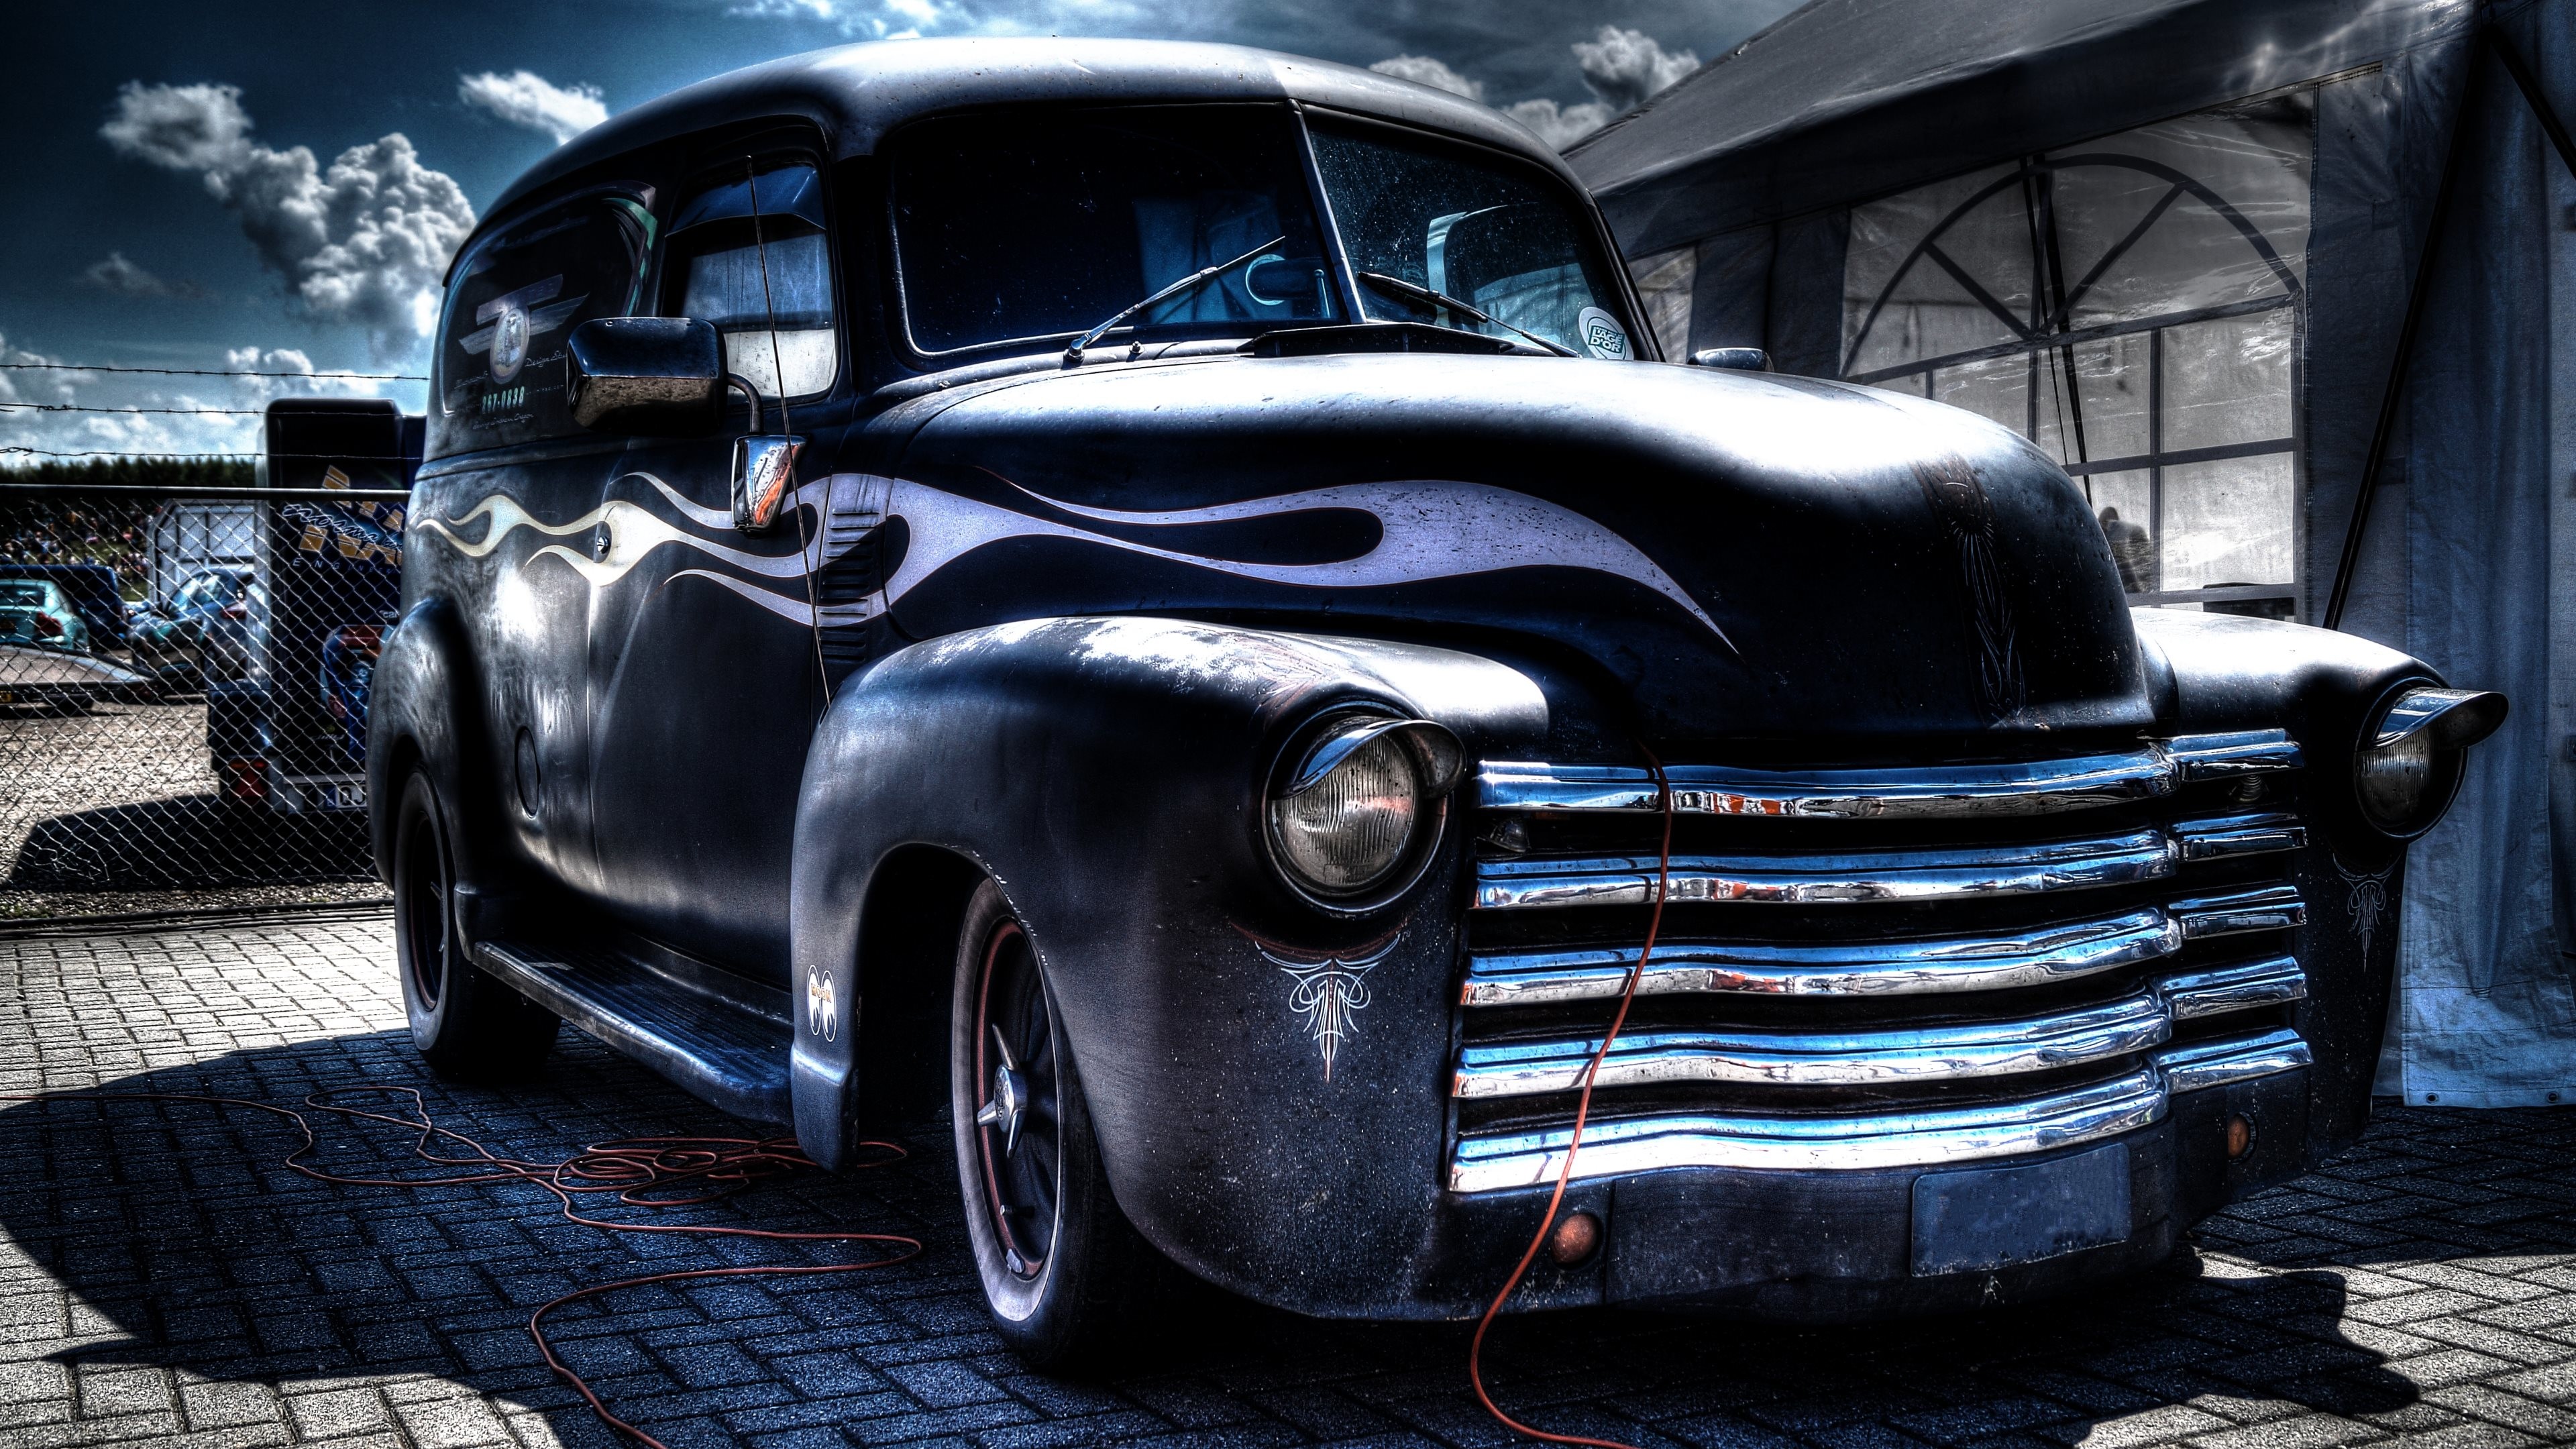 3840x2160 Old American Cars Wallpapers 95 with Old American Cars Wallpapers